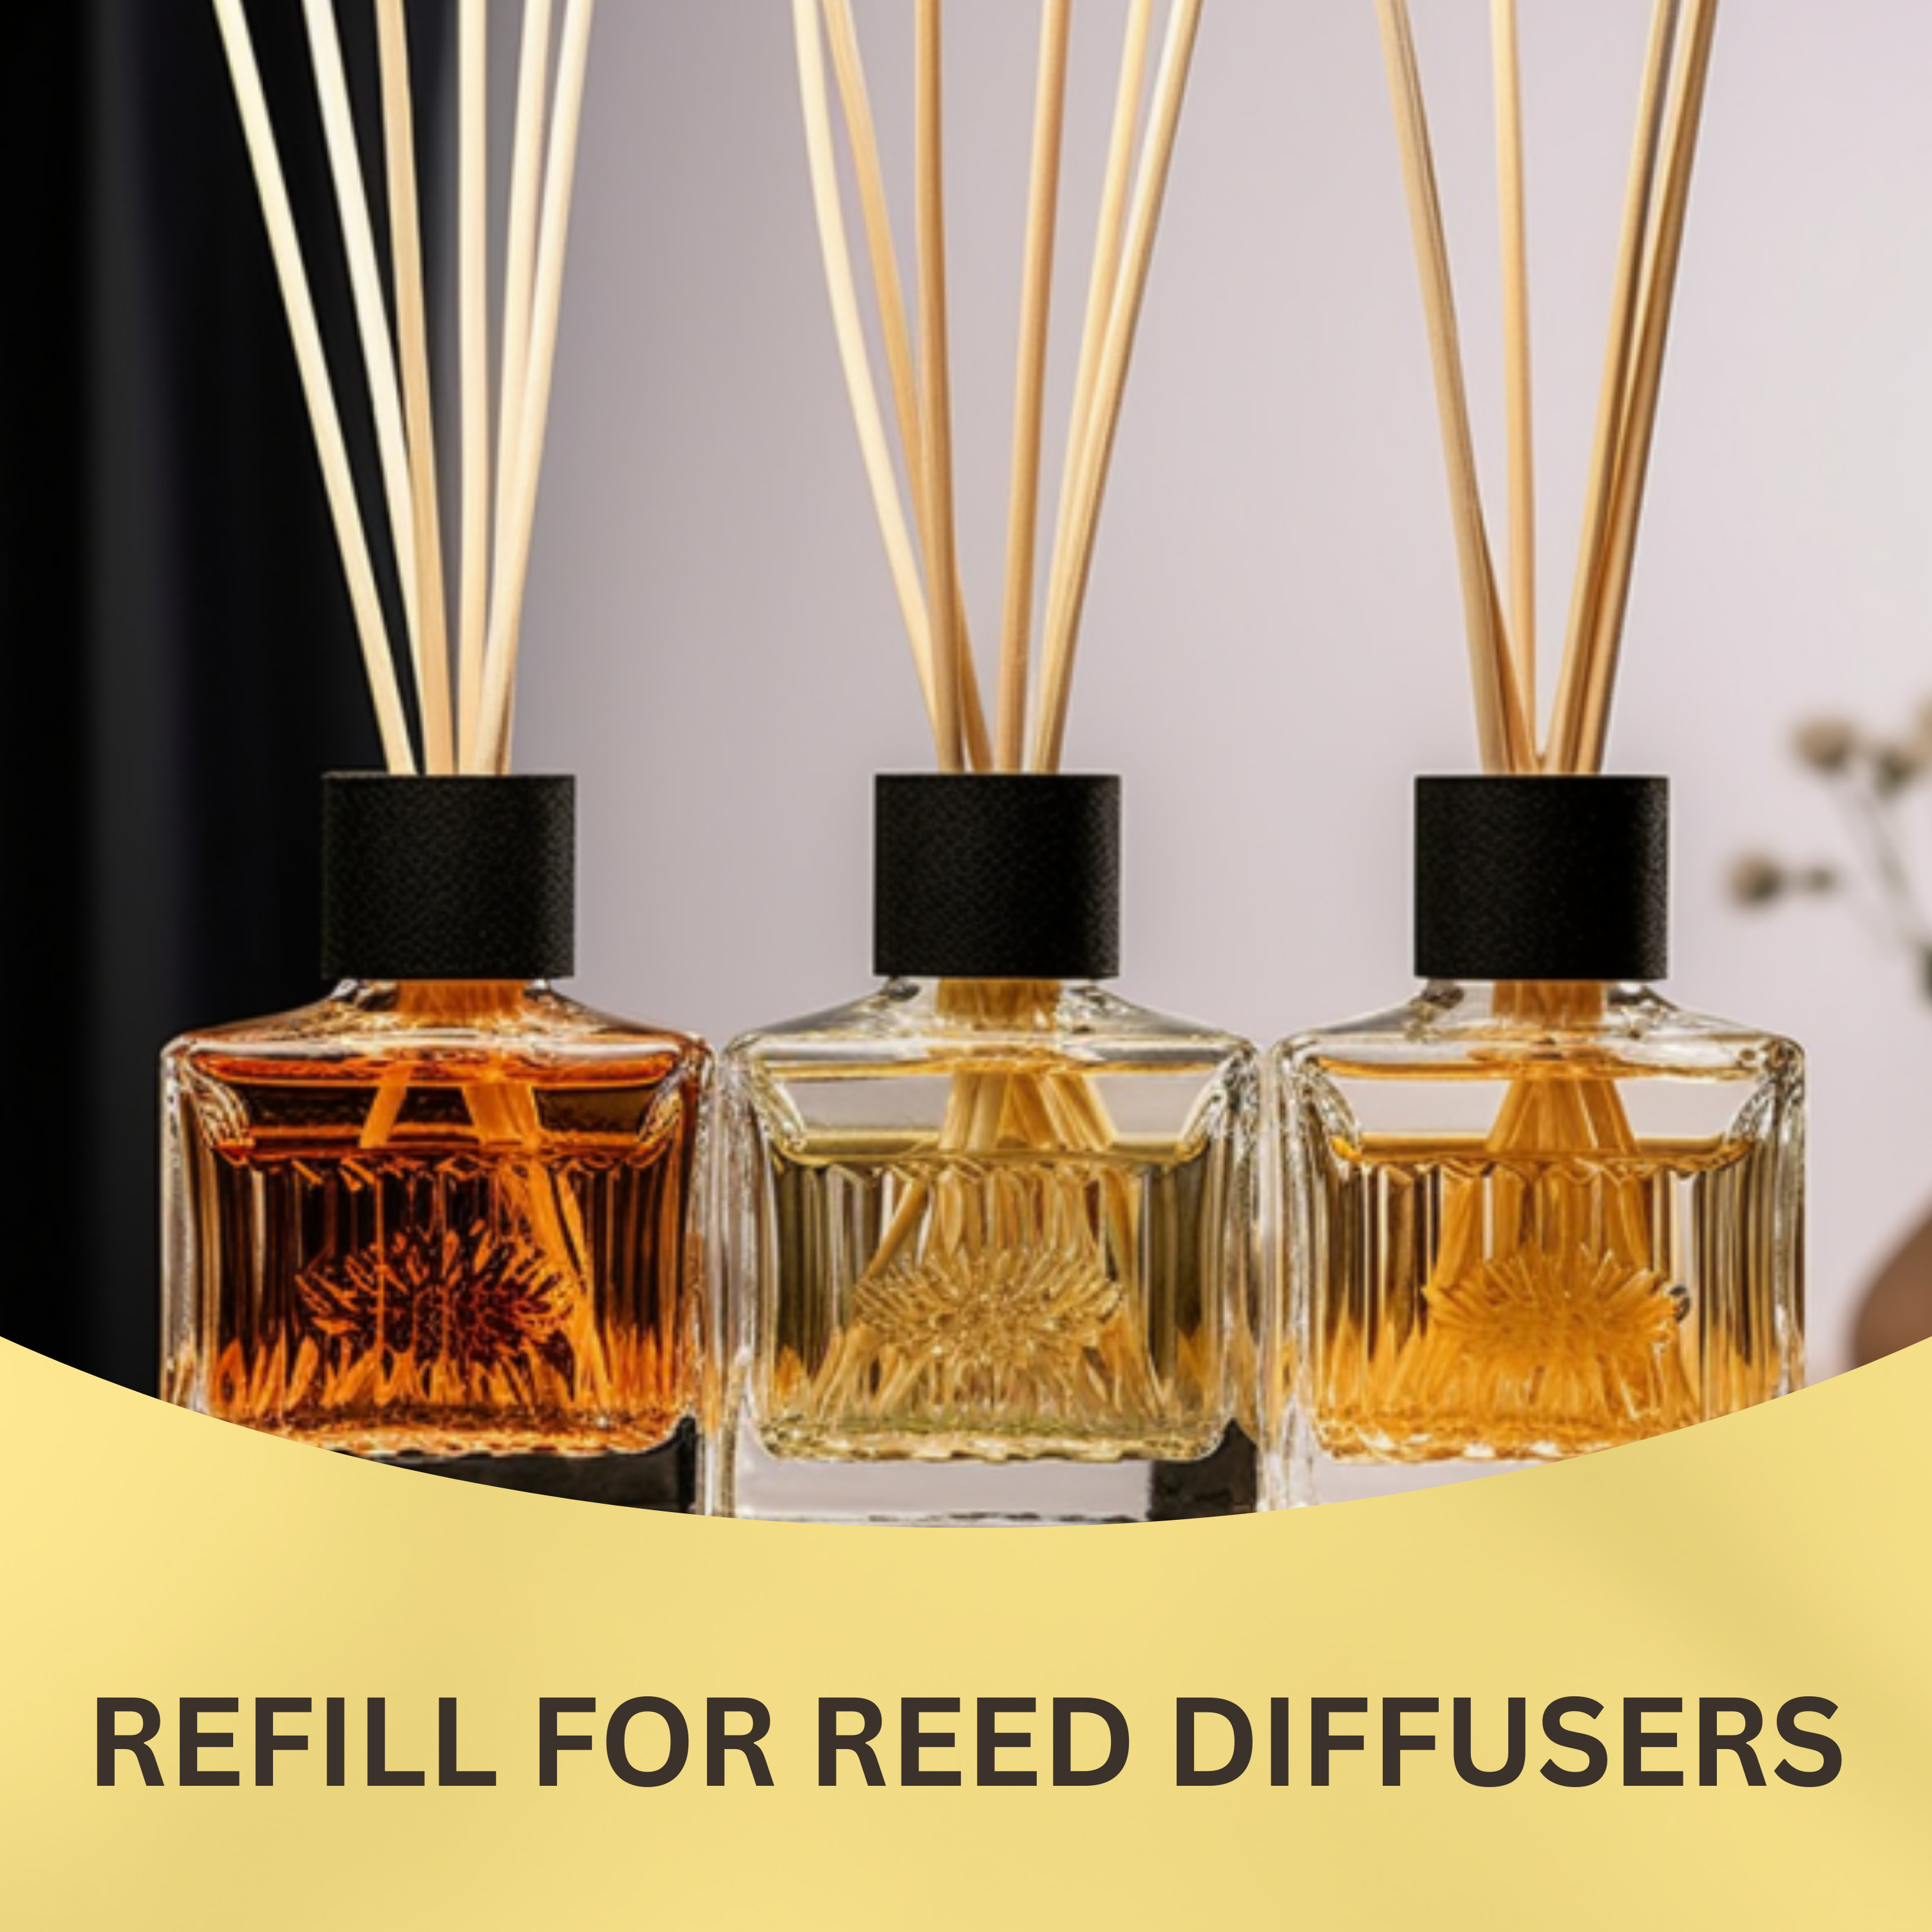 Black Canyon Bartlett Pear & Brandy Scented Reed Diffuser Oil Refill